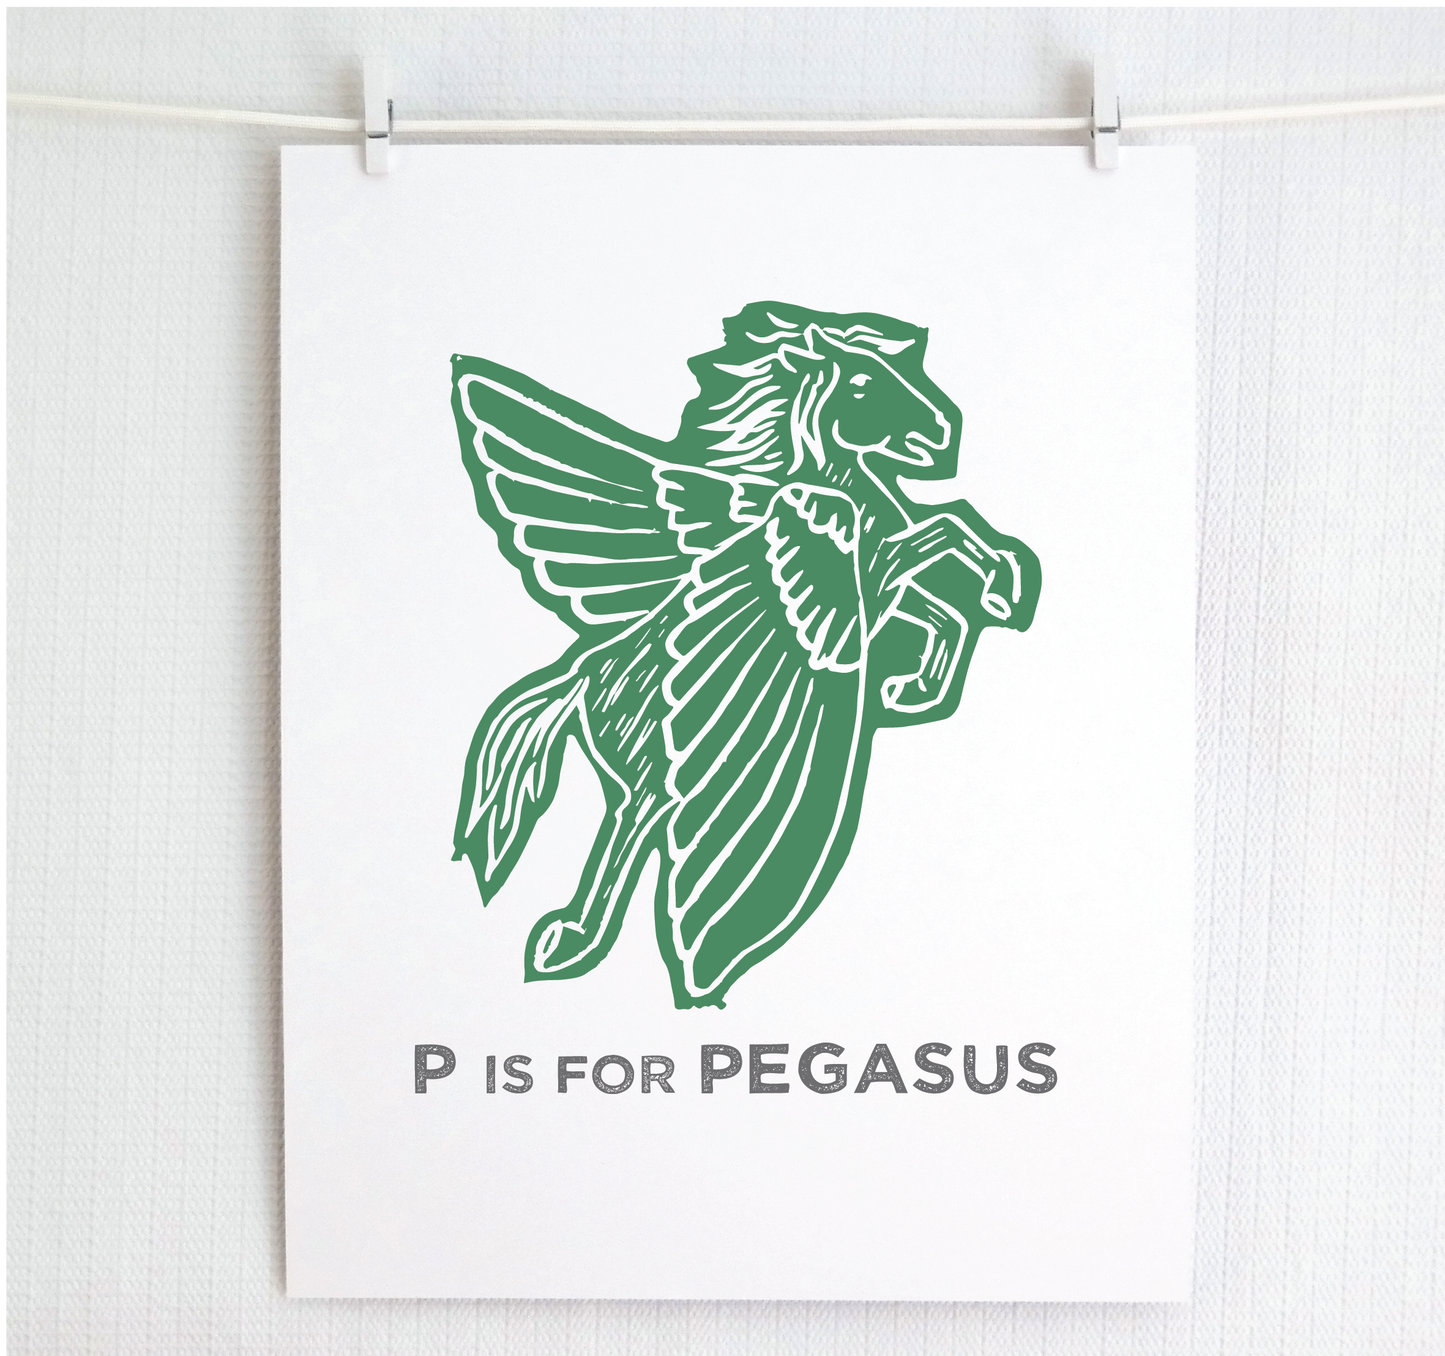 P is for Pegasus